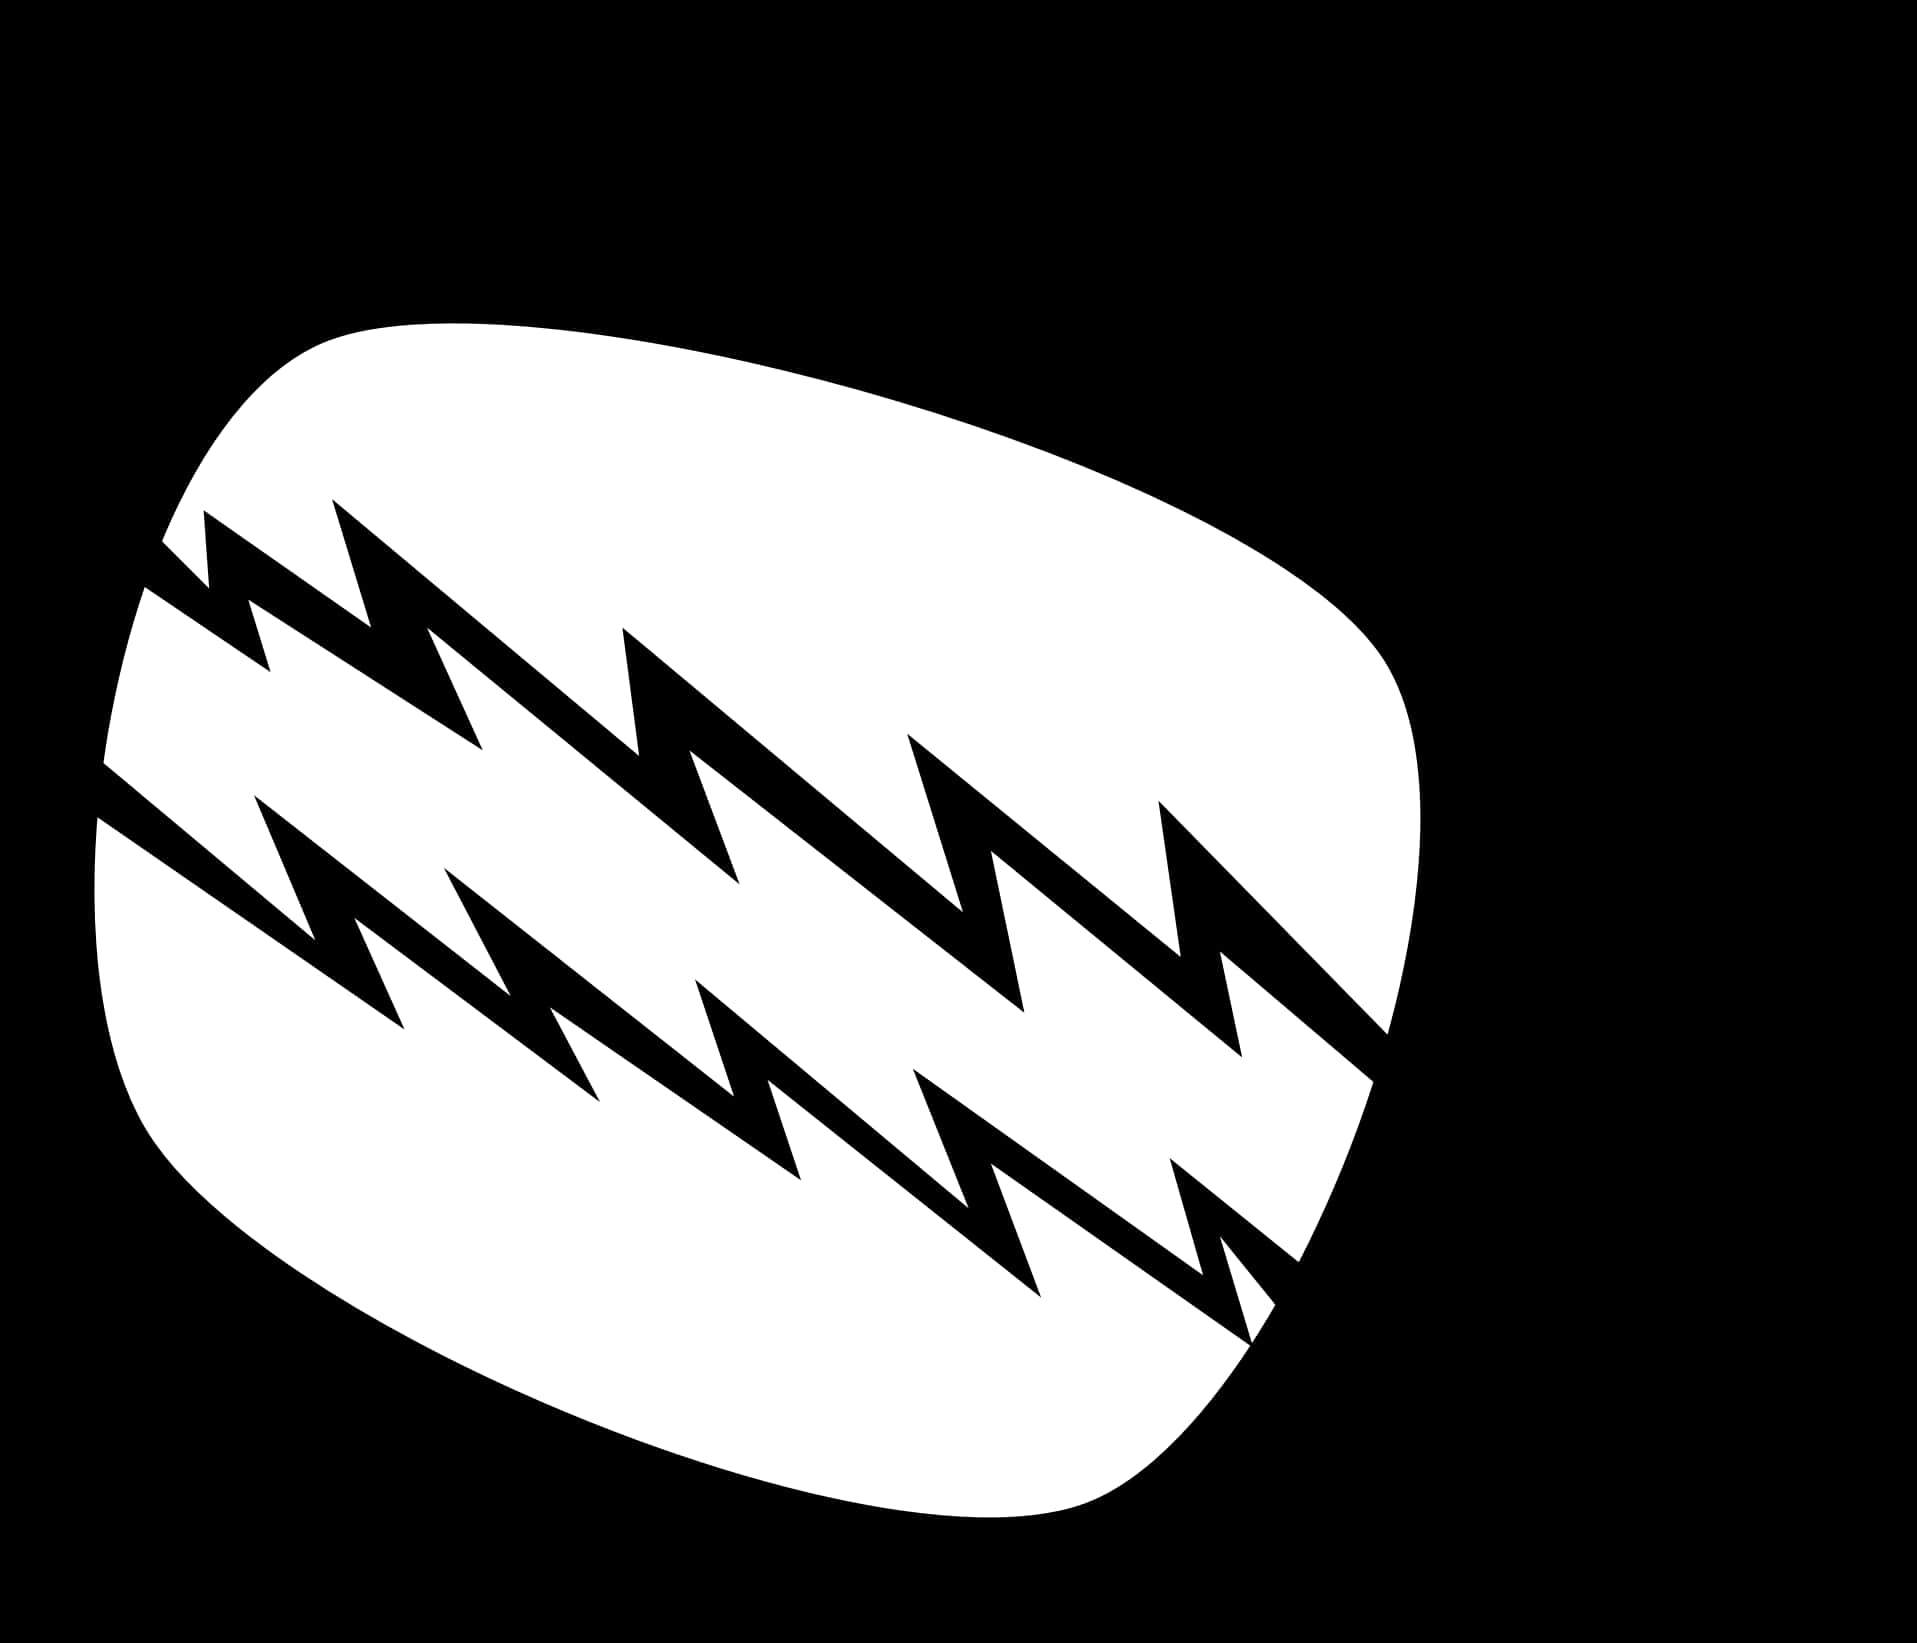 Abstract Monochrome Zigzag Design PNG